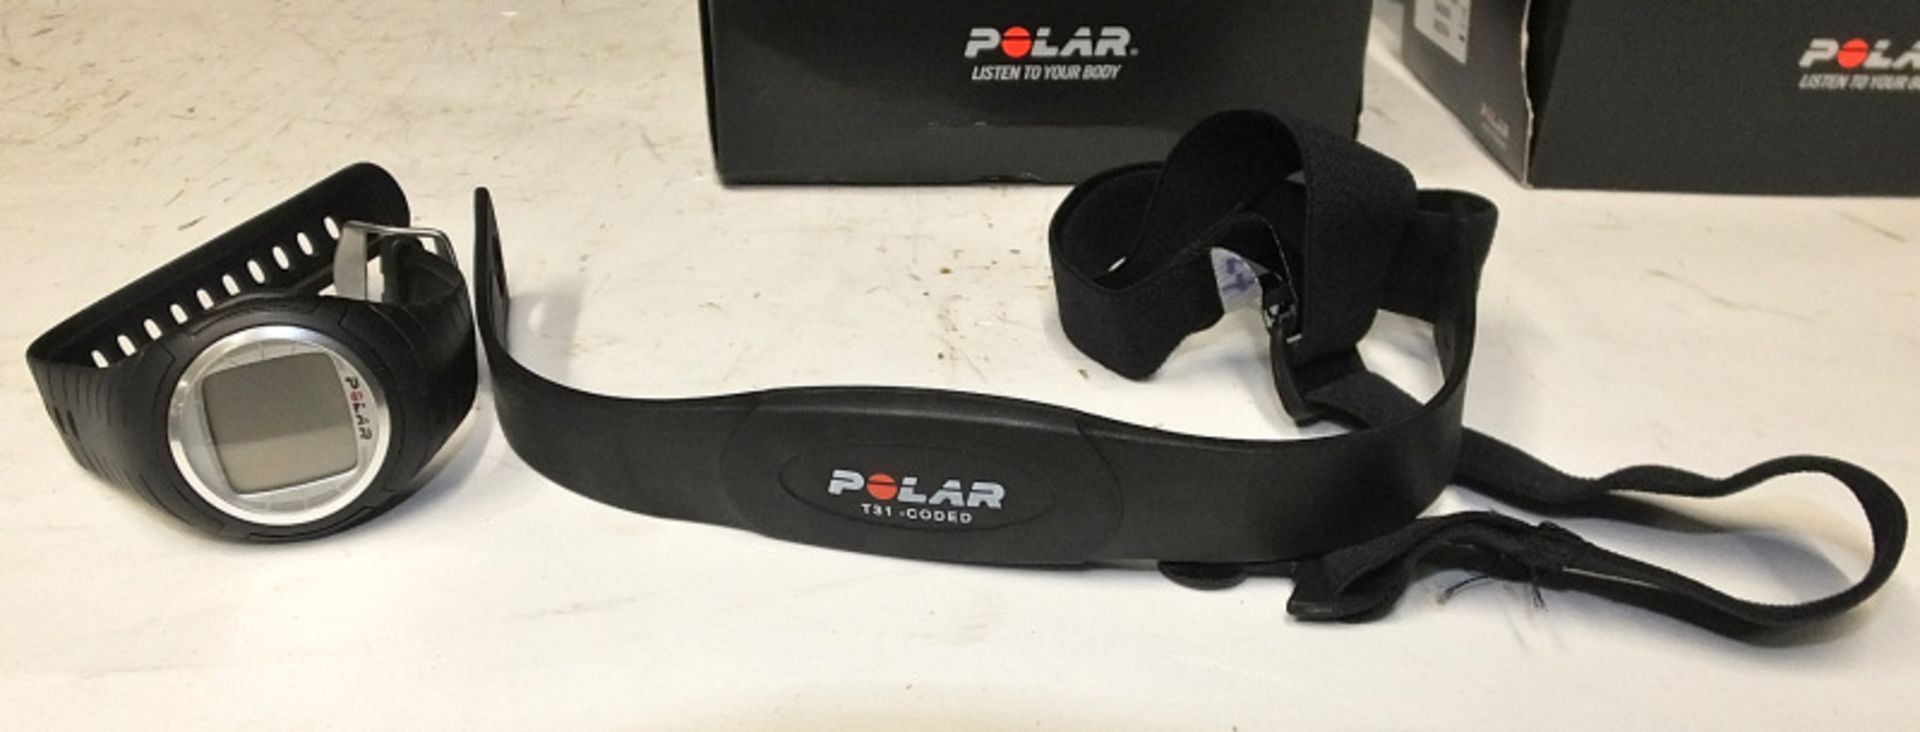 2x Polar F4 Fitness Heart Rate Monitors with Polar Heart Rate Chest Sensors - Image 2 of 5